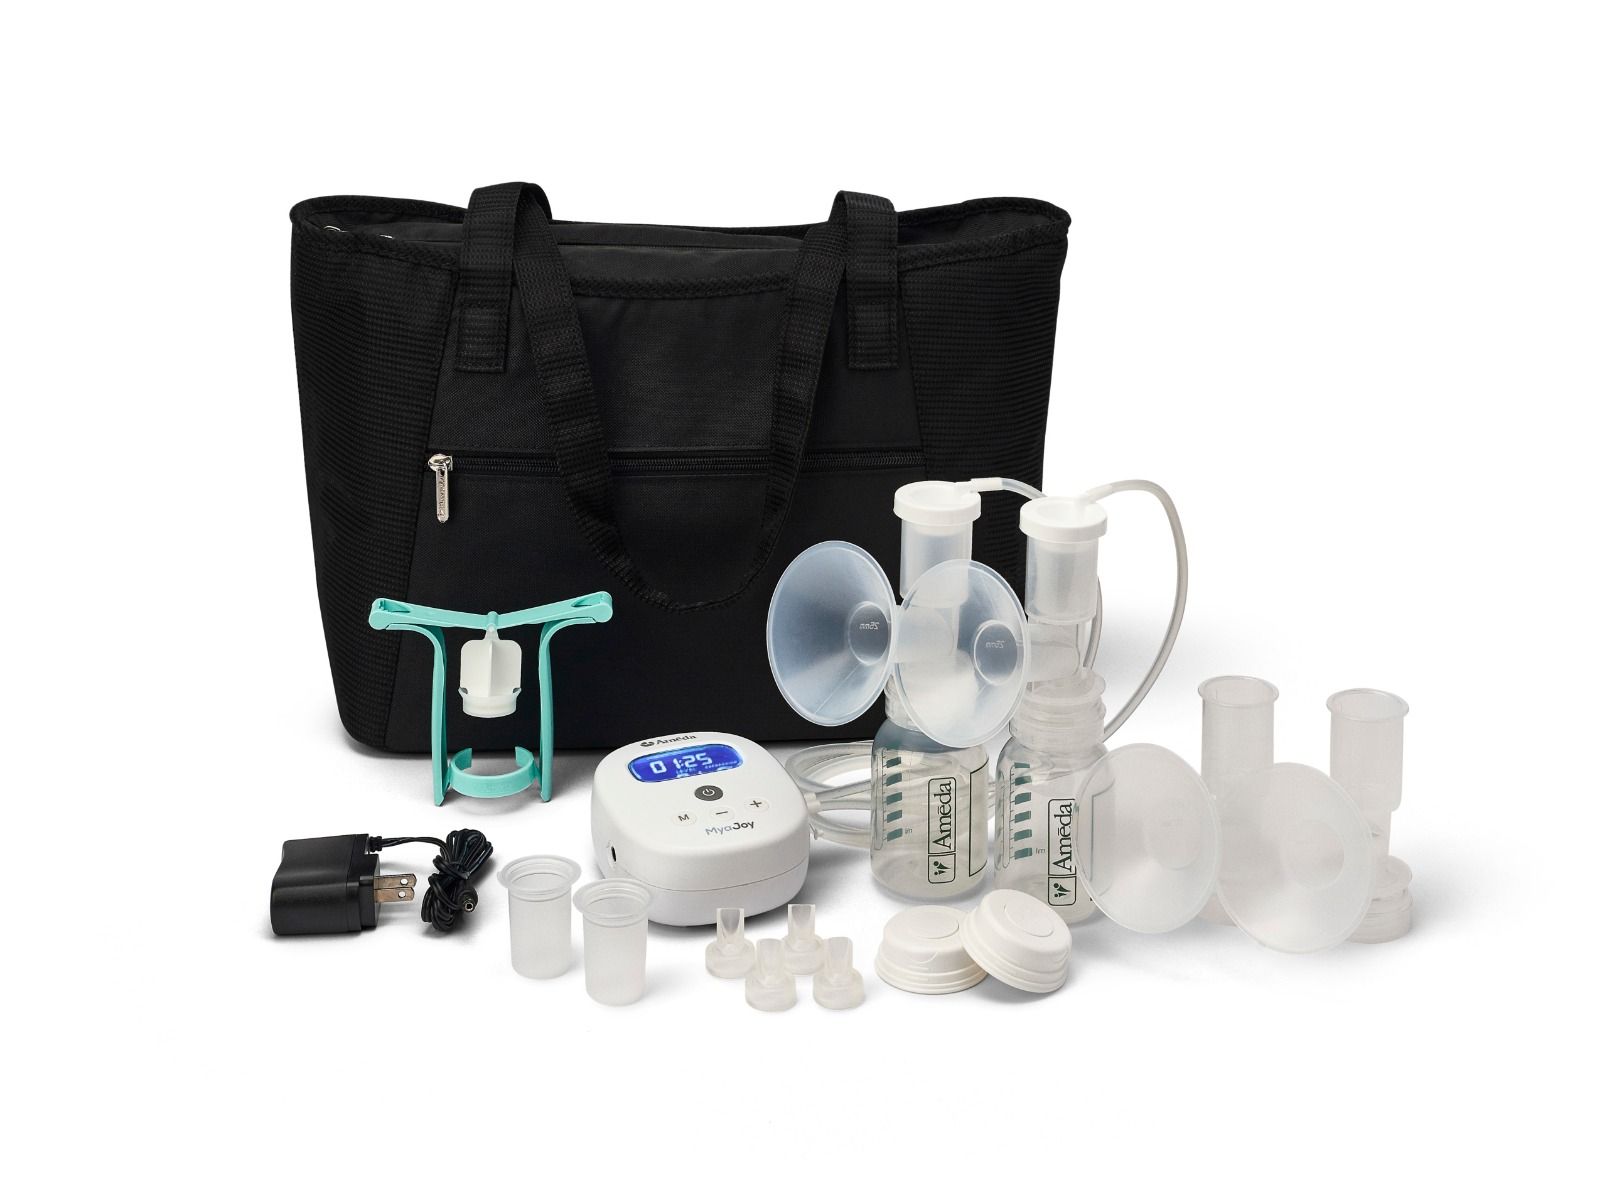 Ameda Mya Joy Hospital Strength Portable Electric Breast Pump with Large Tote & Accessories